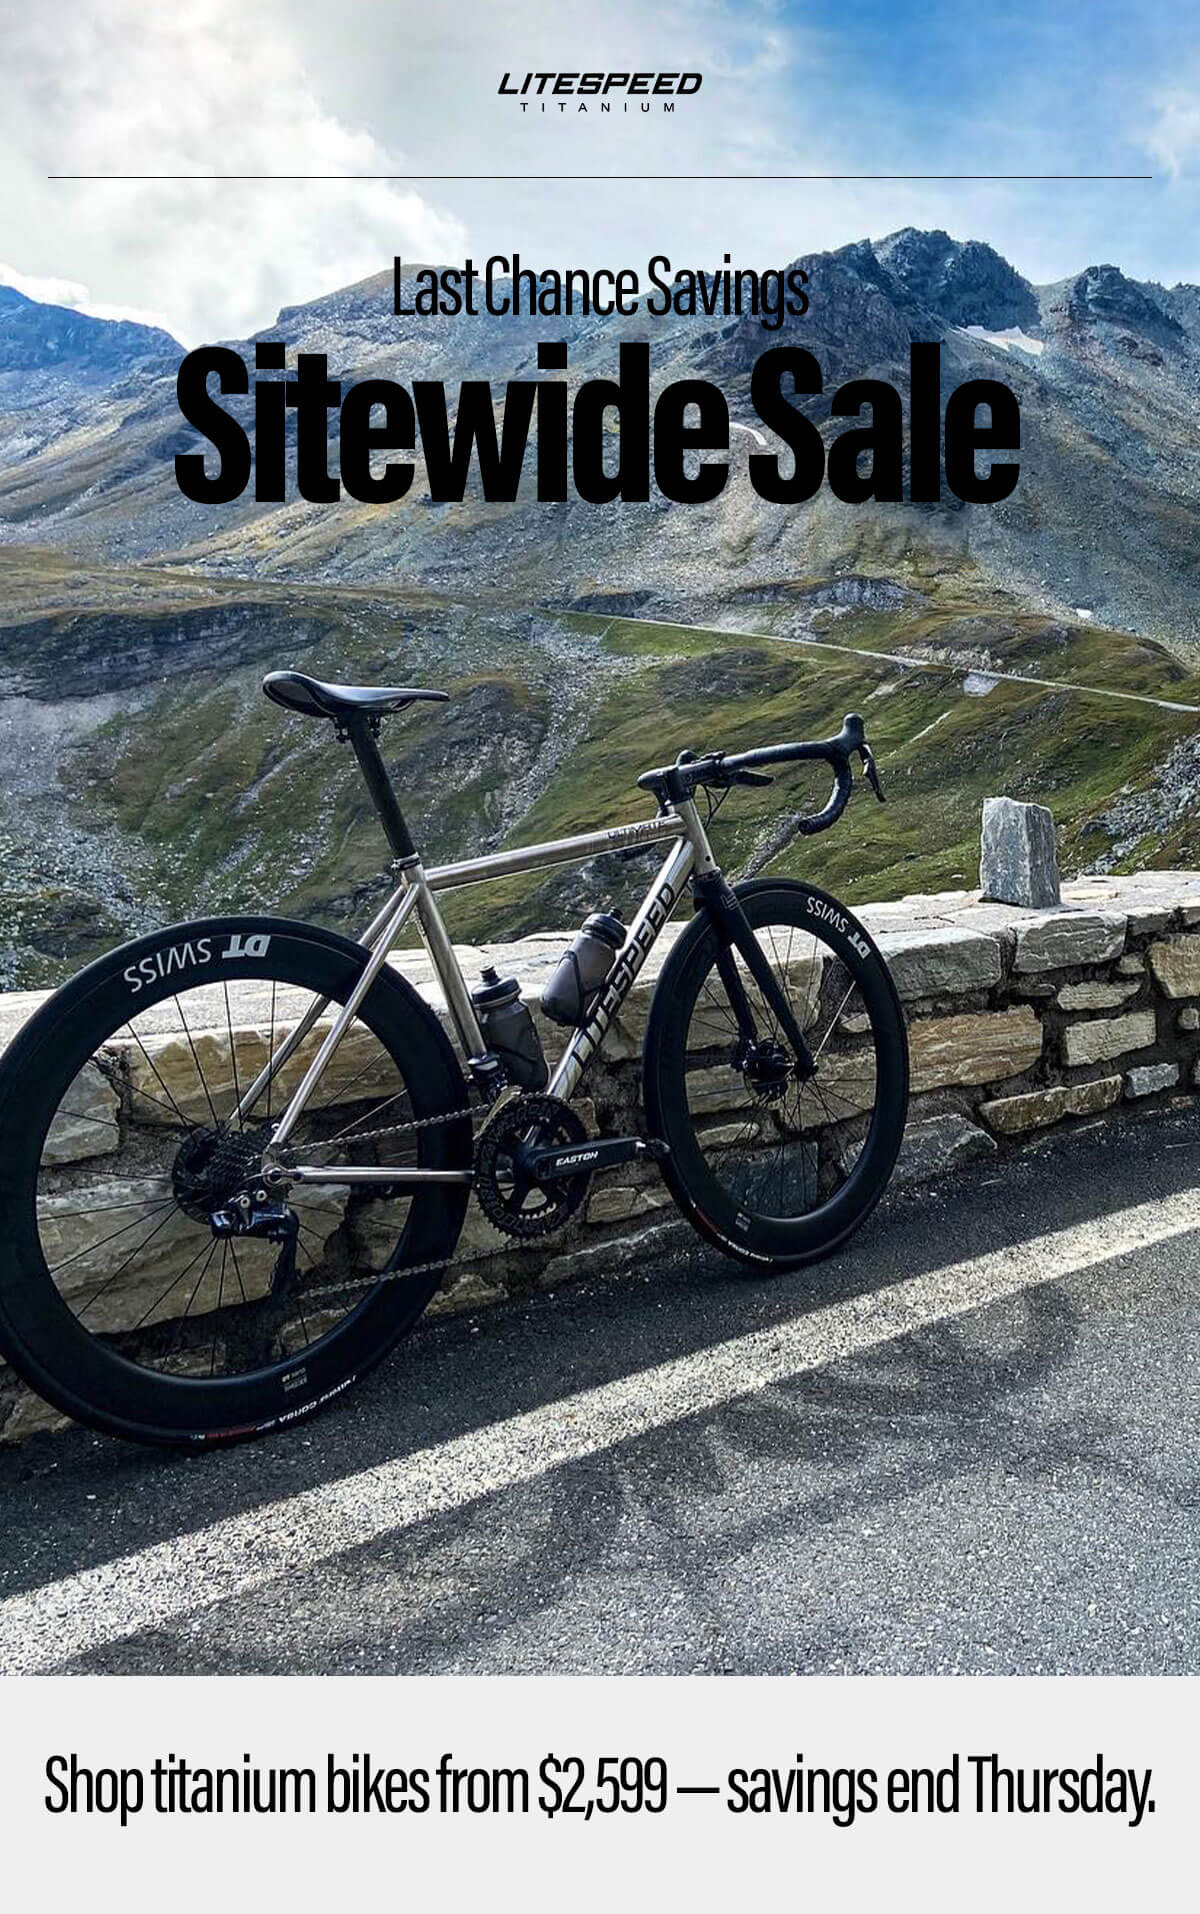 Last chance savings on Litespeed''s Sitewide Sale! Shop titanium bikes from $2,599 with savings ending on October 22nd.